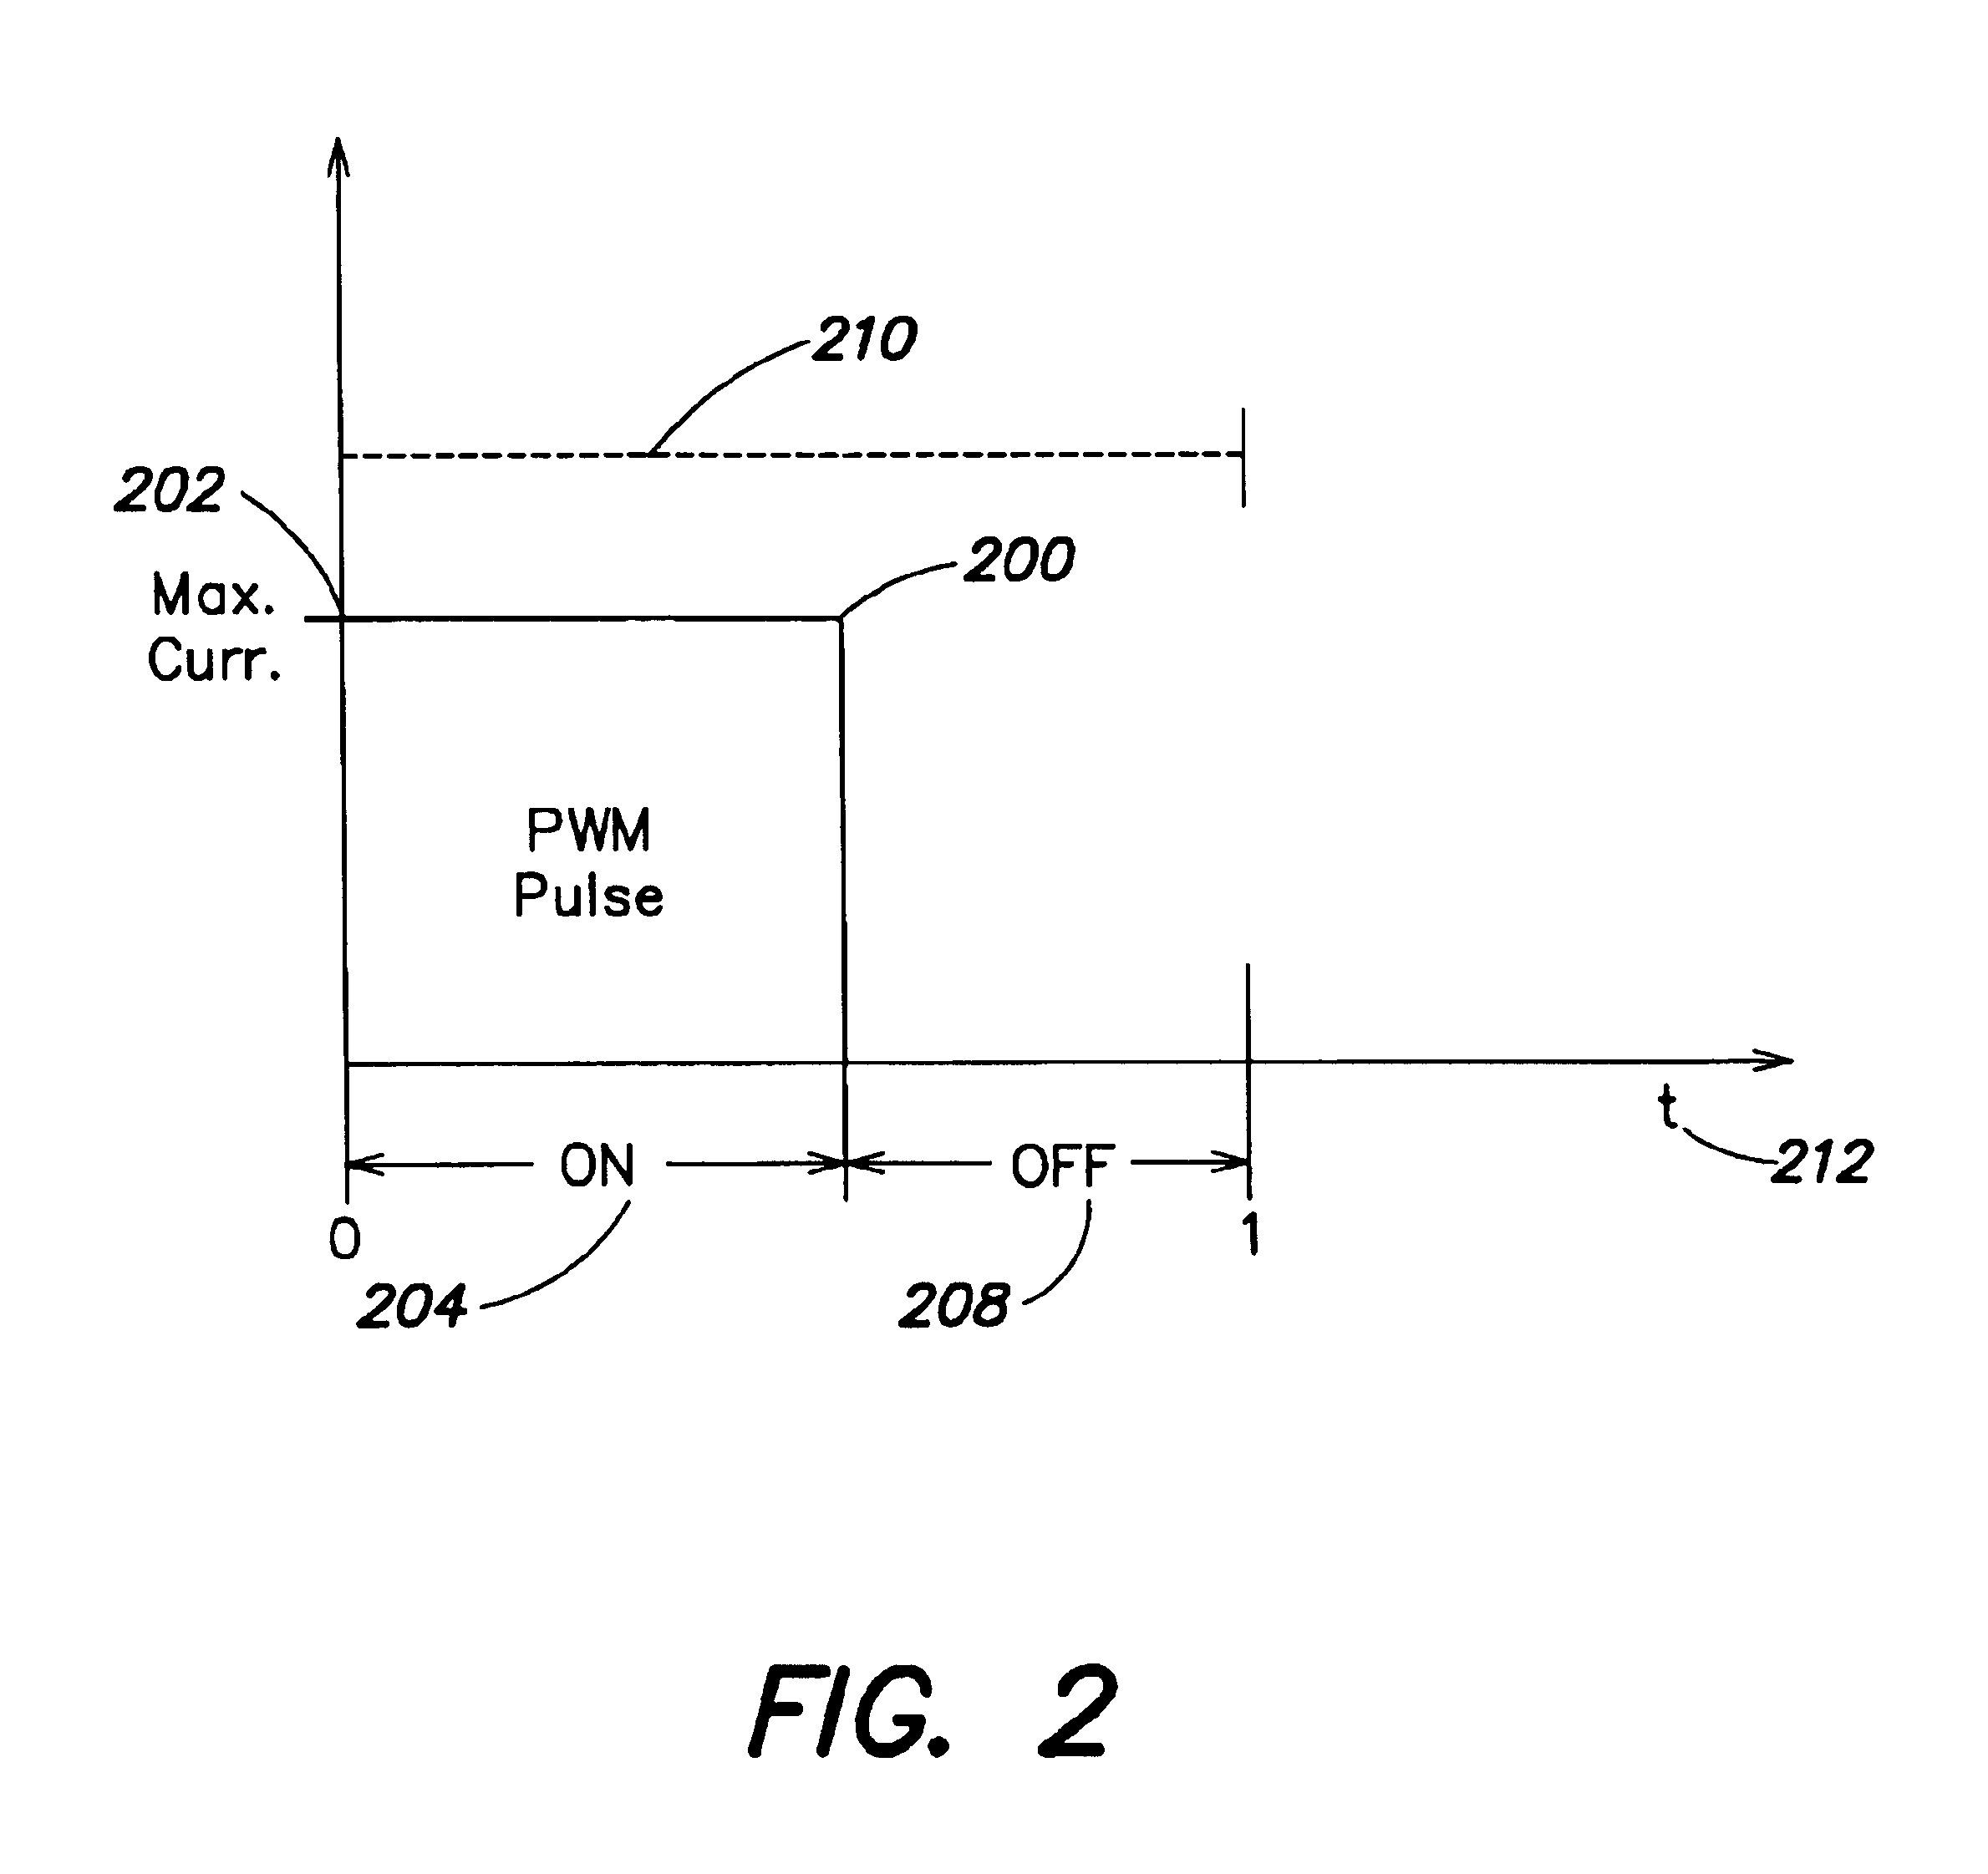 Systems and methods for controlling illumination sources